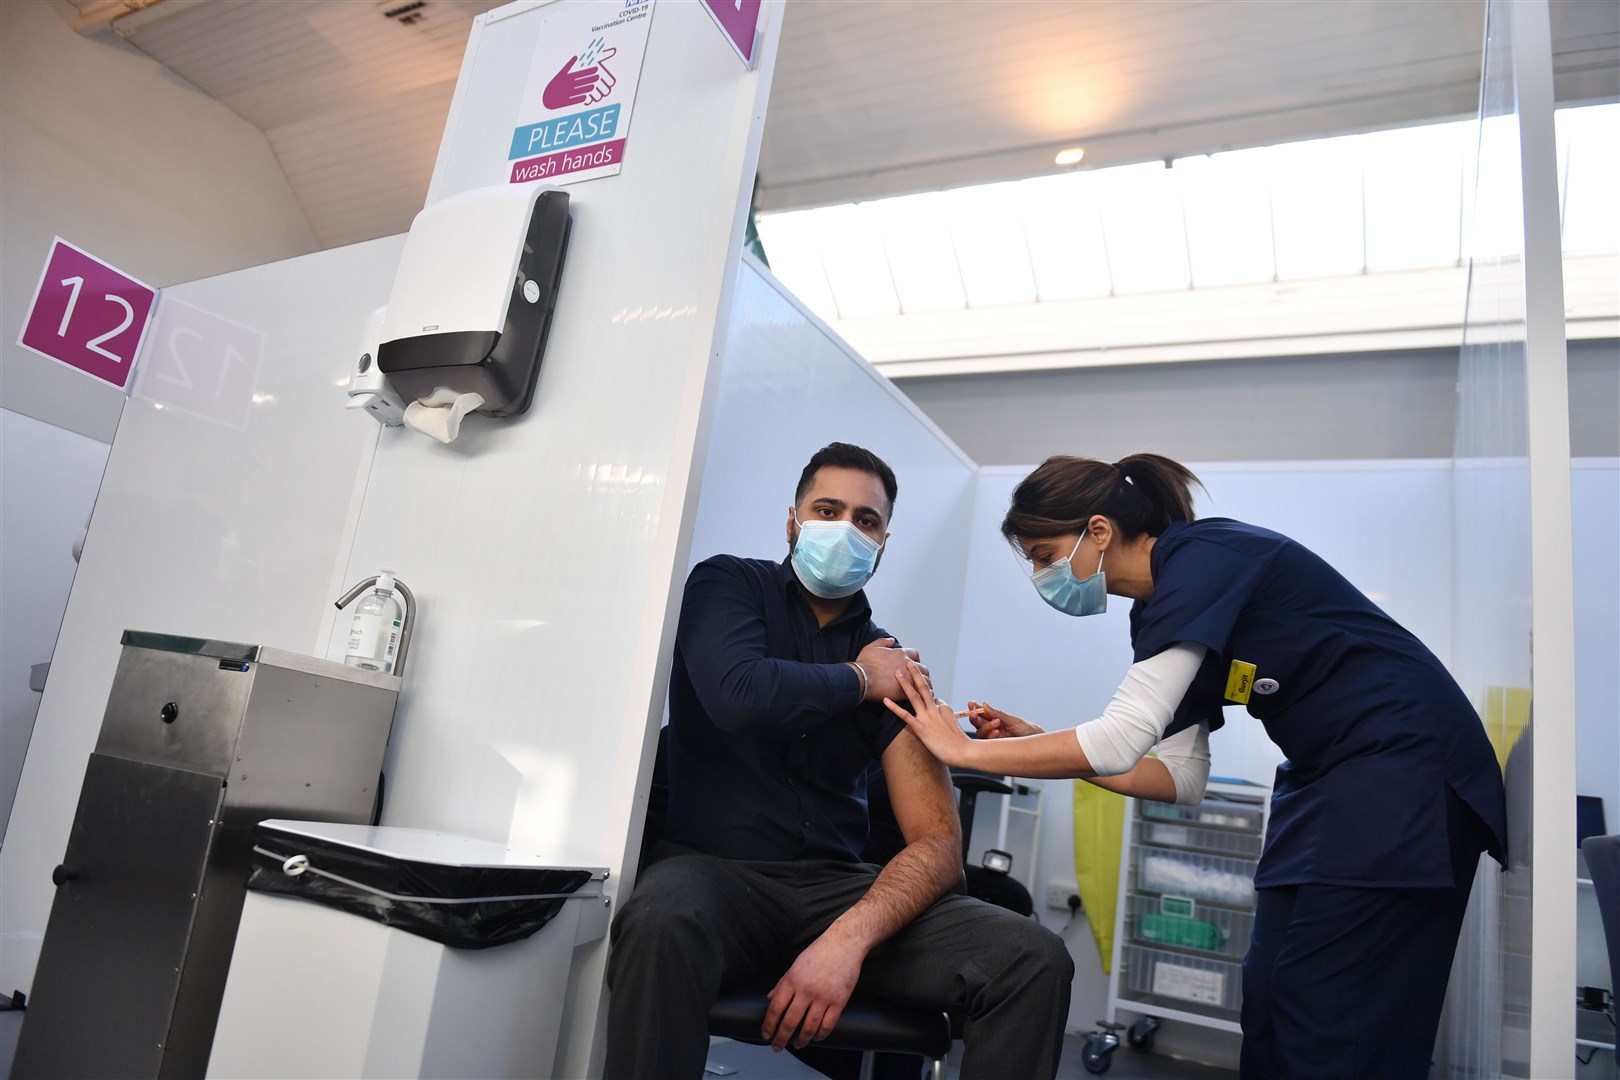 Pharmacist Josh Athwal receives a vaccination at the museum. (Jacob King/PA)